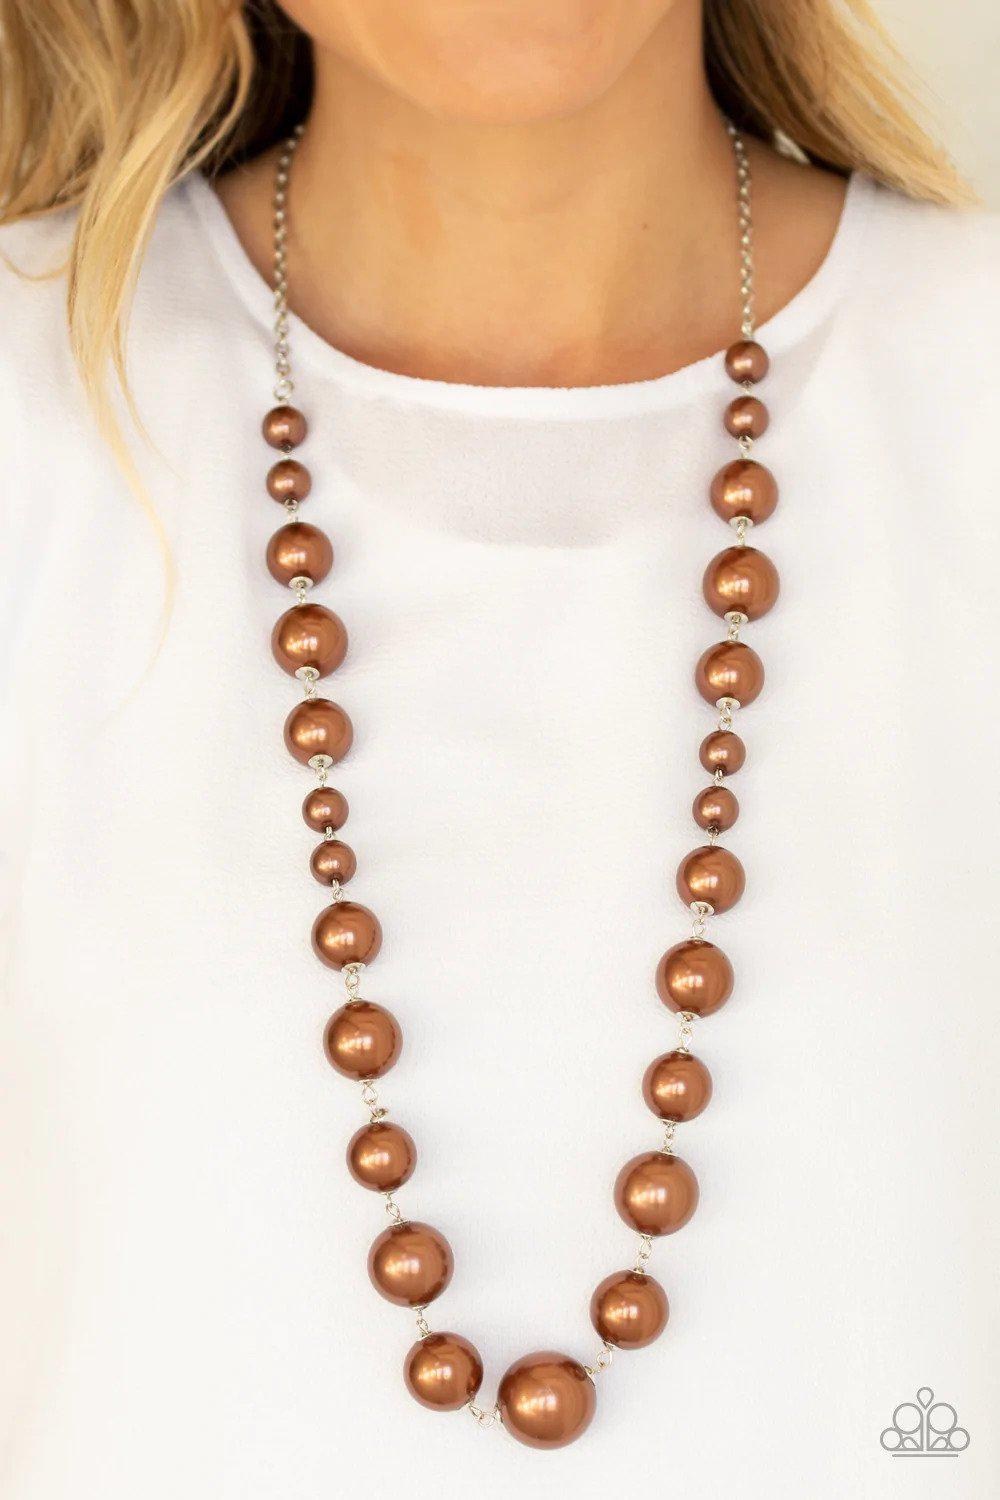 Pearl Prodigy Brown Necklace - Paparazzi Accessories- lightbox - CarasShop.com - $5 Jewelry by Cara Jewels